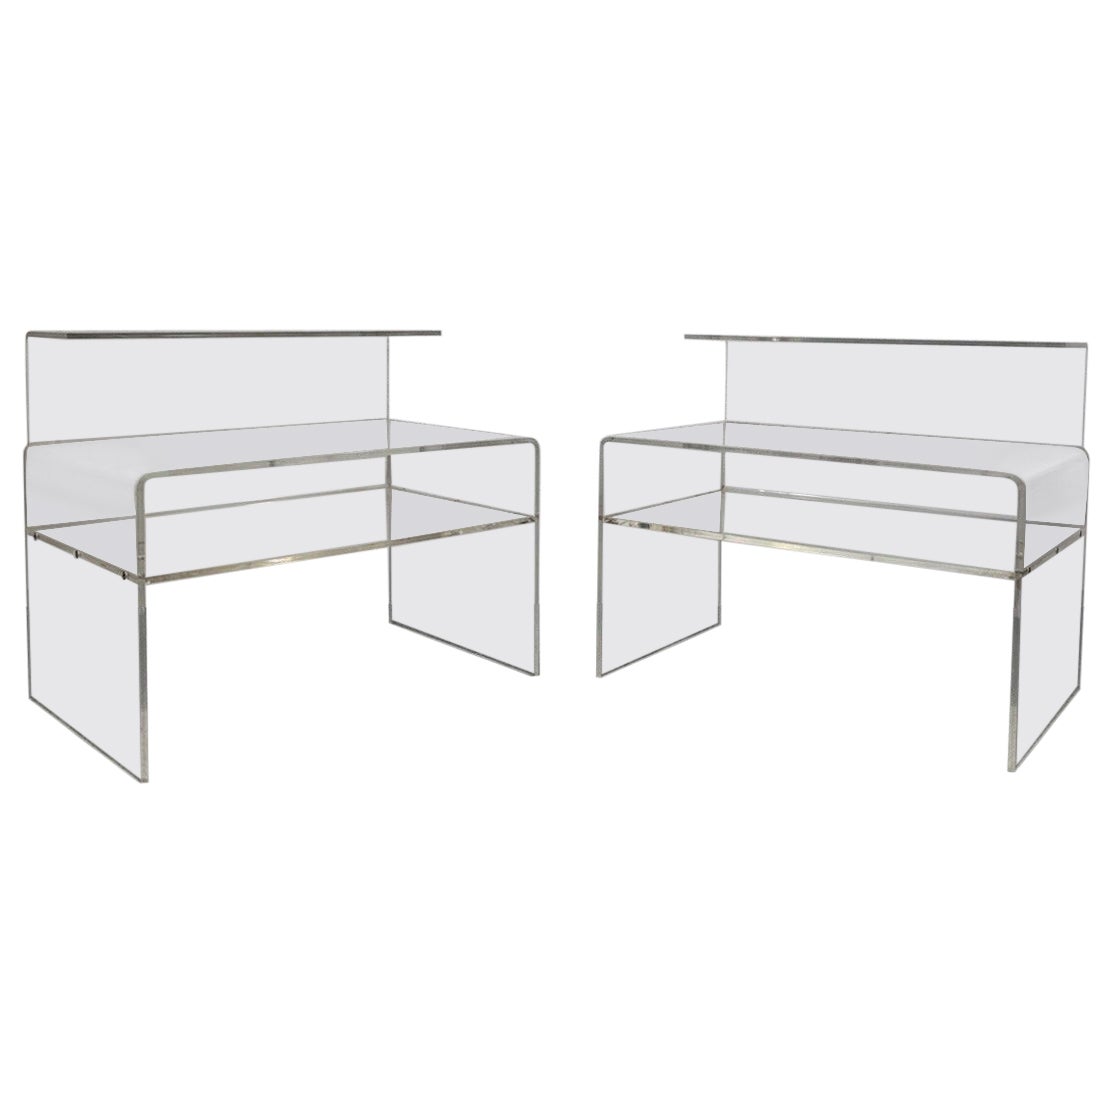 Pair Of Nightstands In Transparent Acrylic Space Age 1970s Modern Design